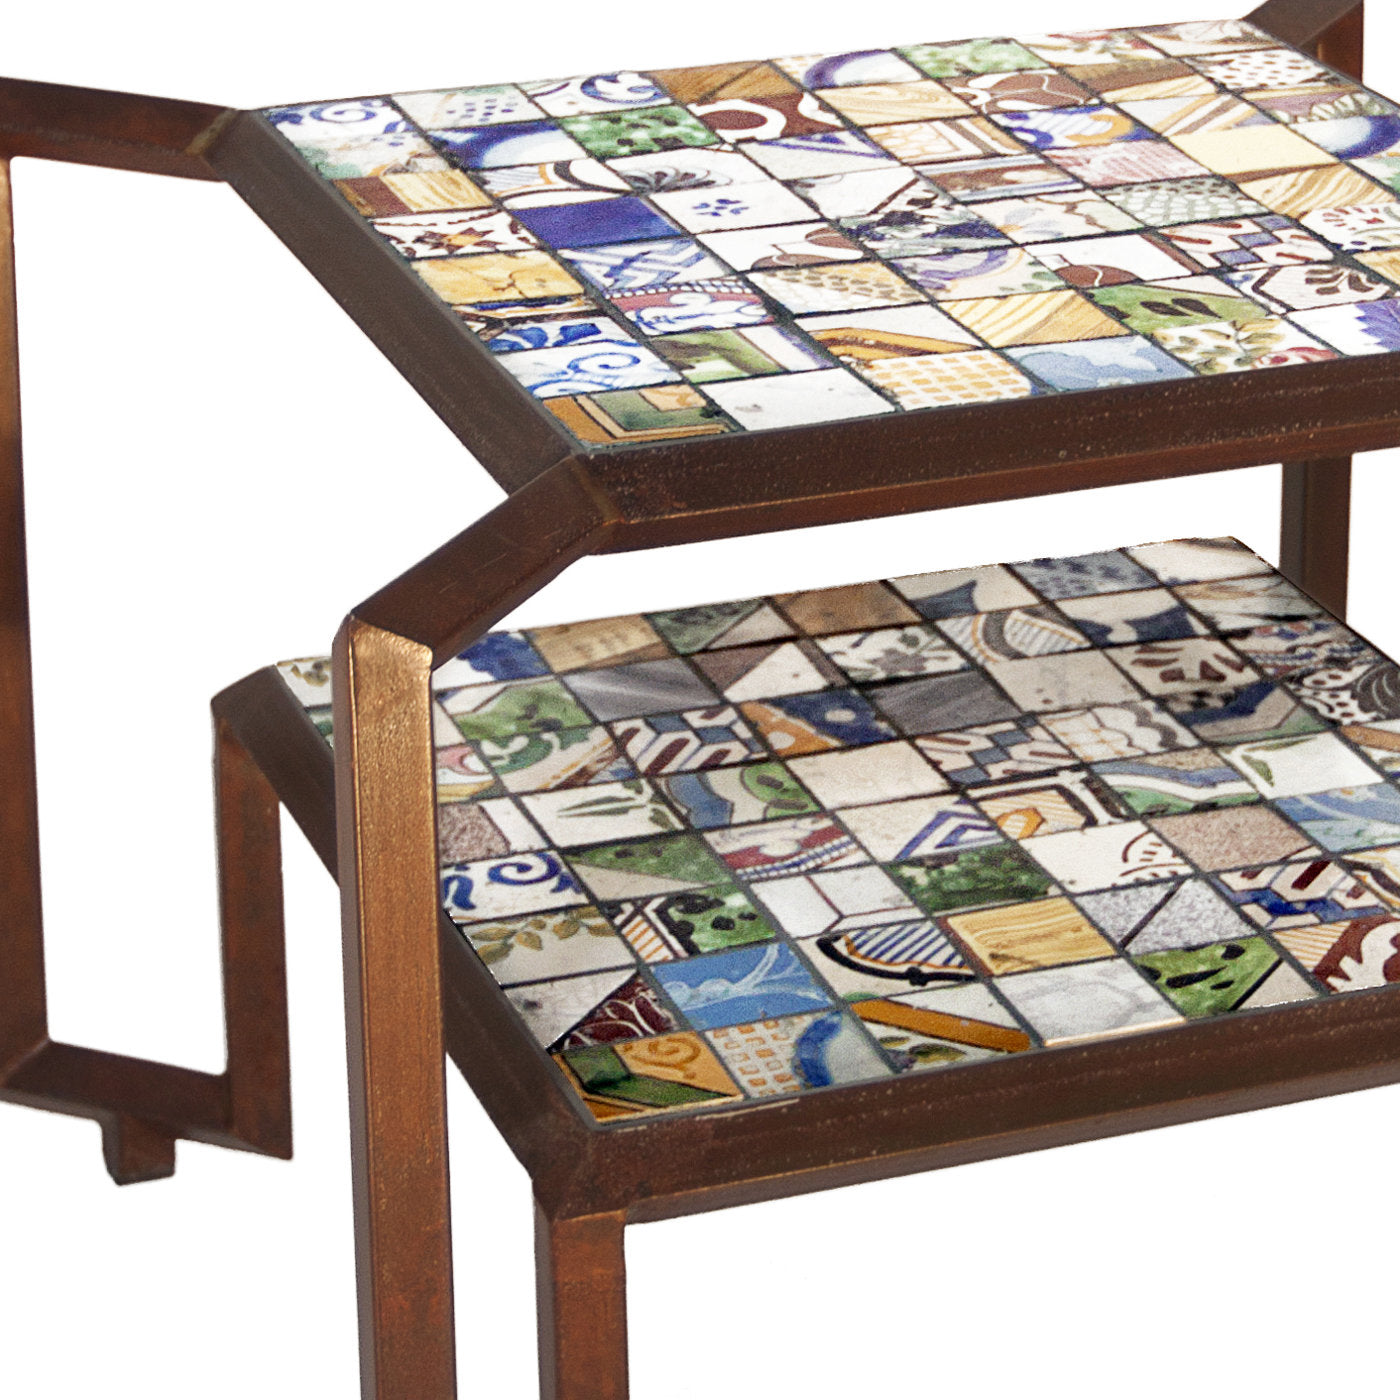 Spider Mosaic Tile Table - Alternative view 1